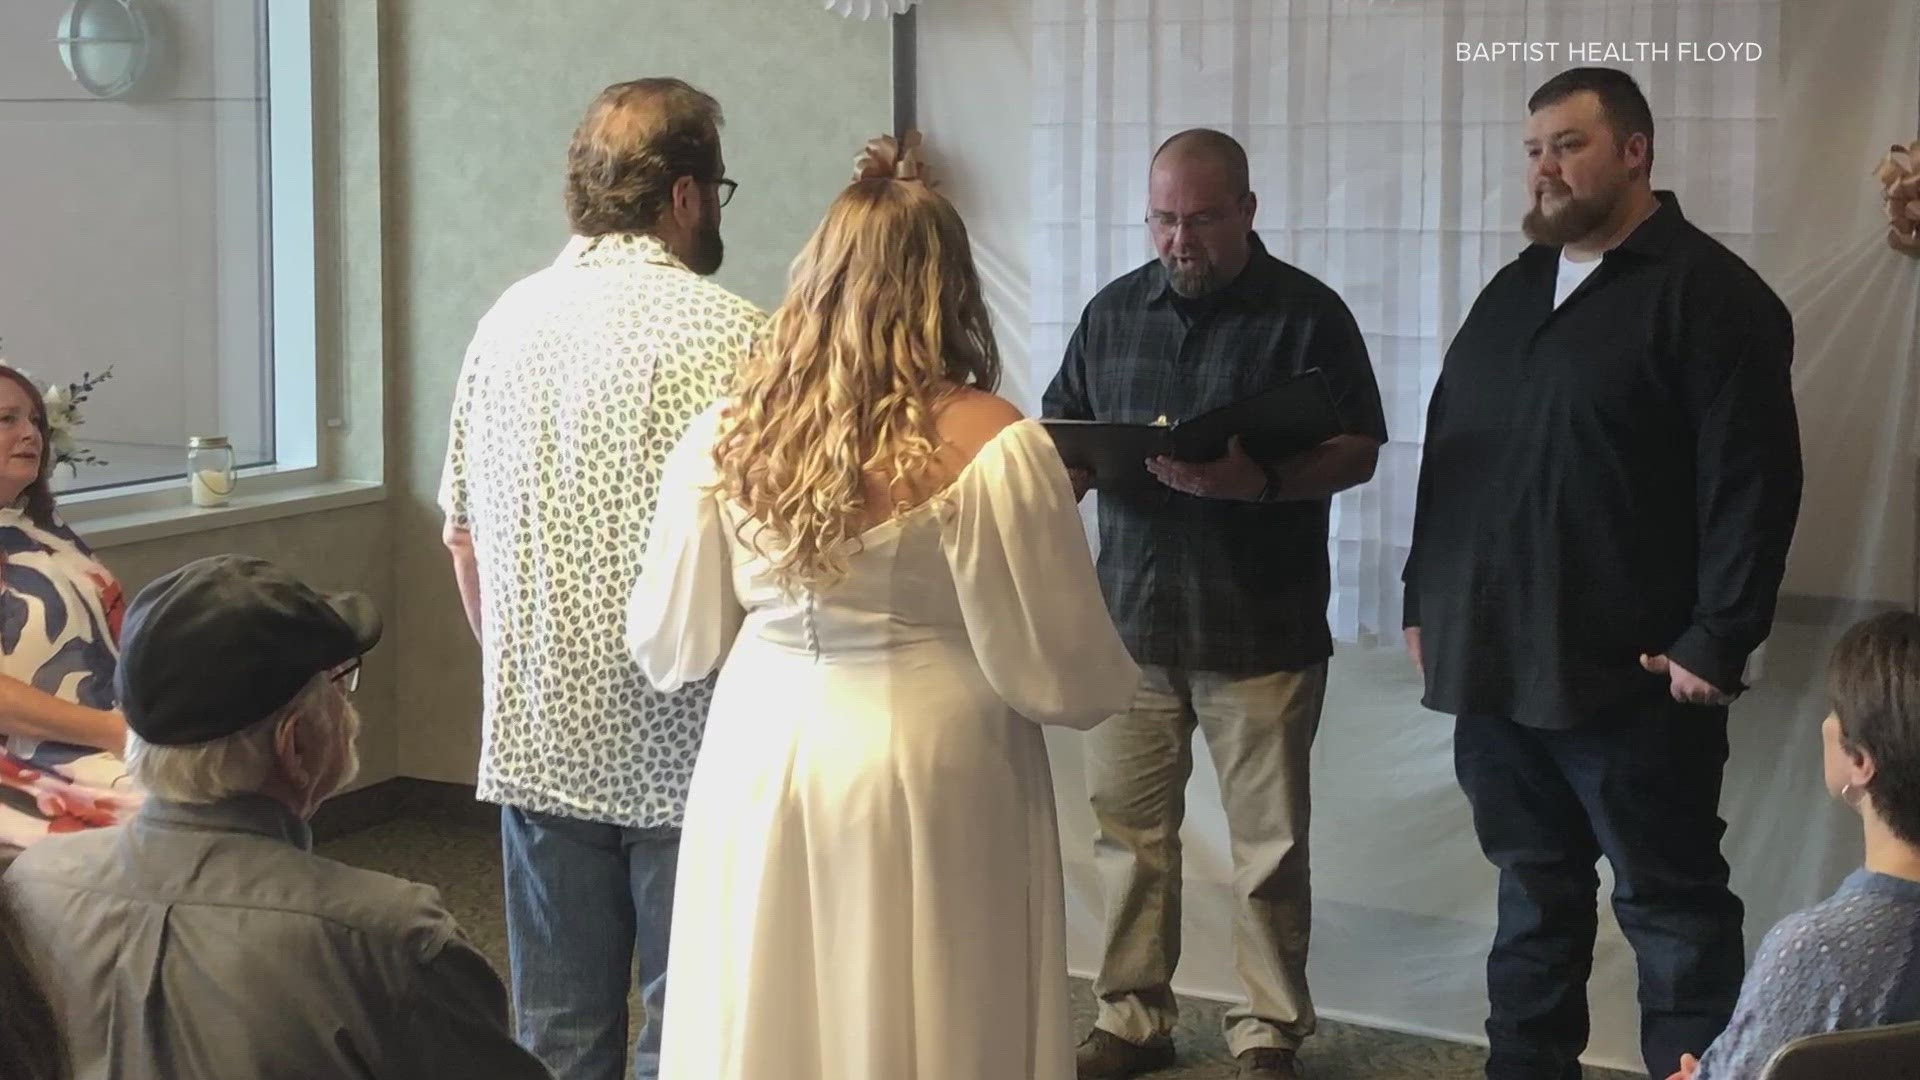 It wasn't your typical venue, but that made the wedding at Baptist Health Floyd even more special.